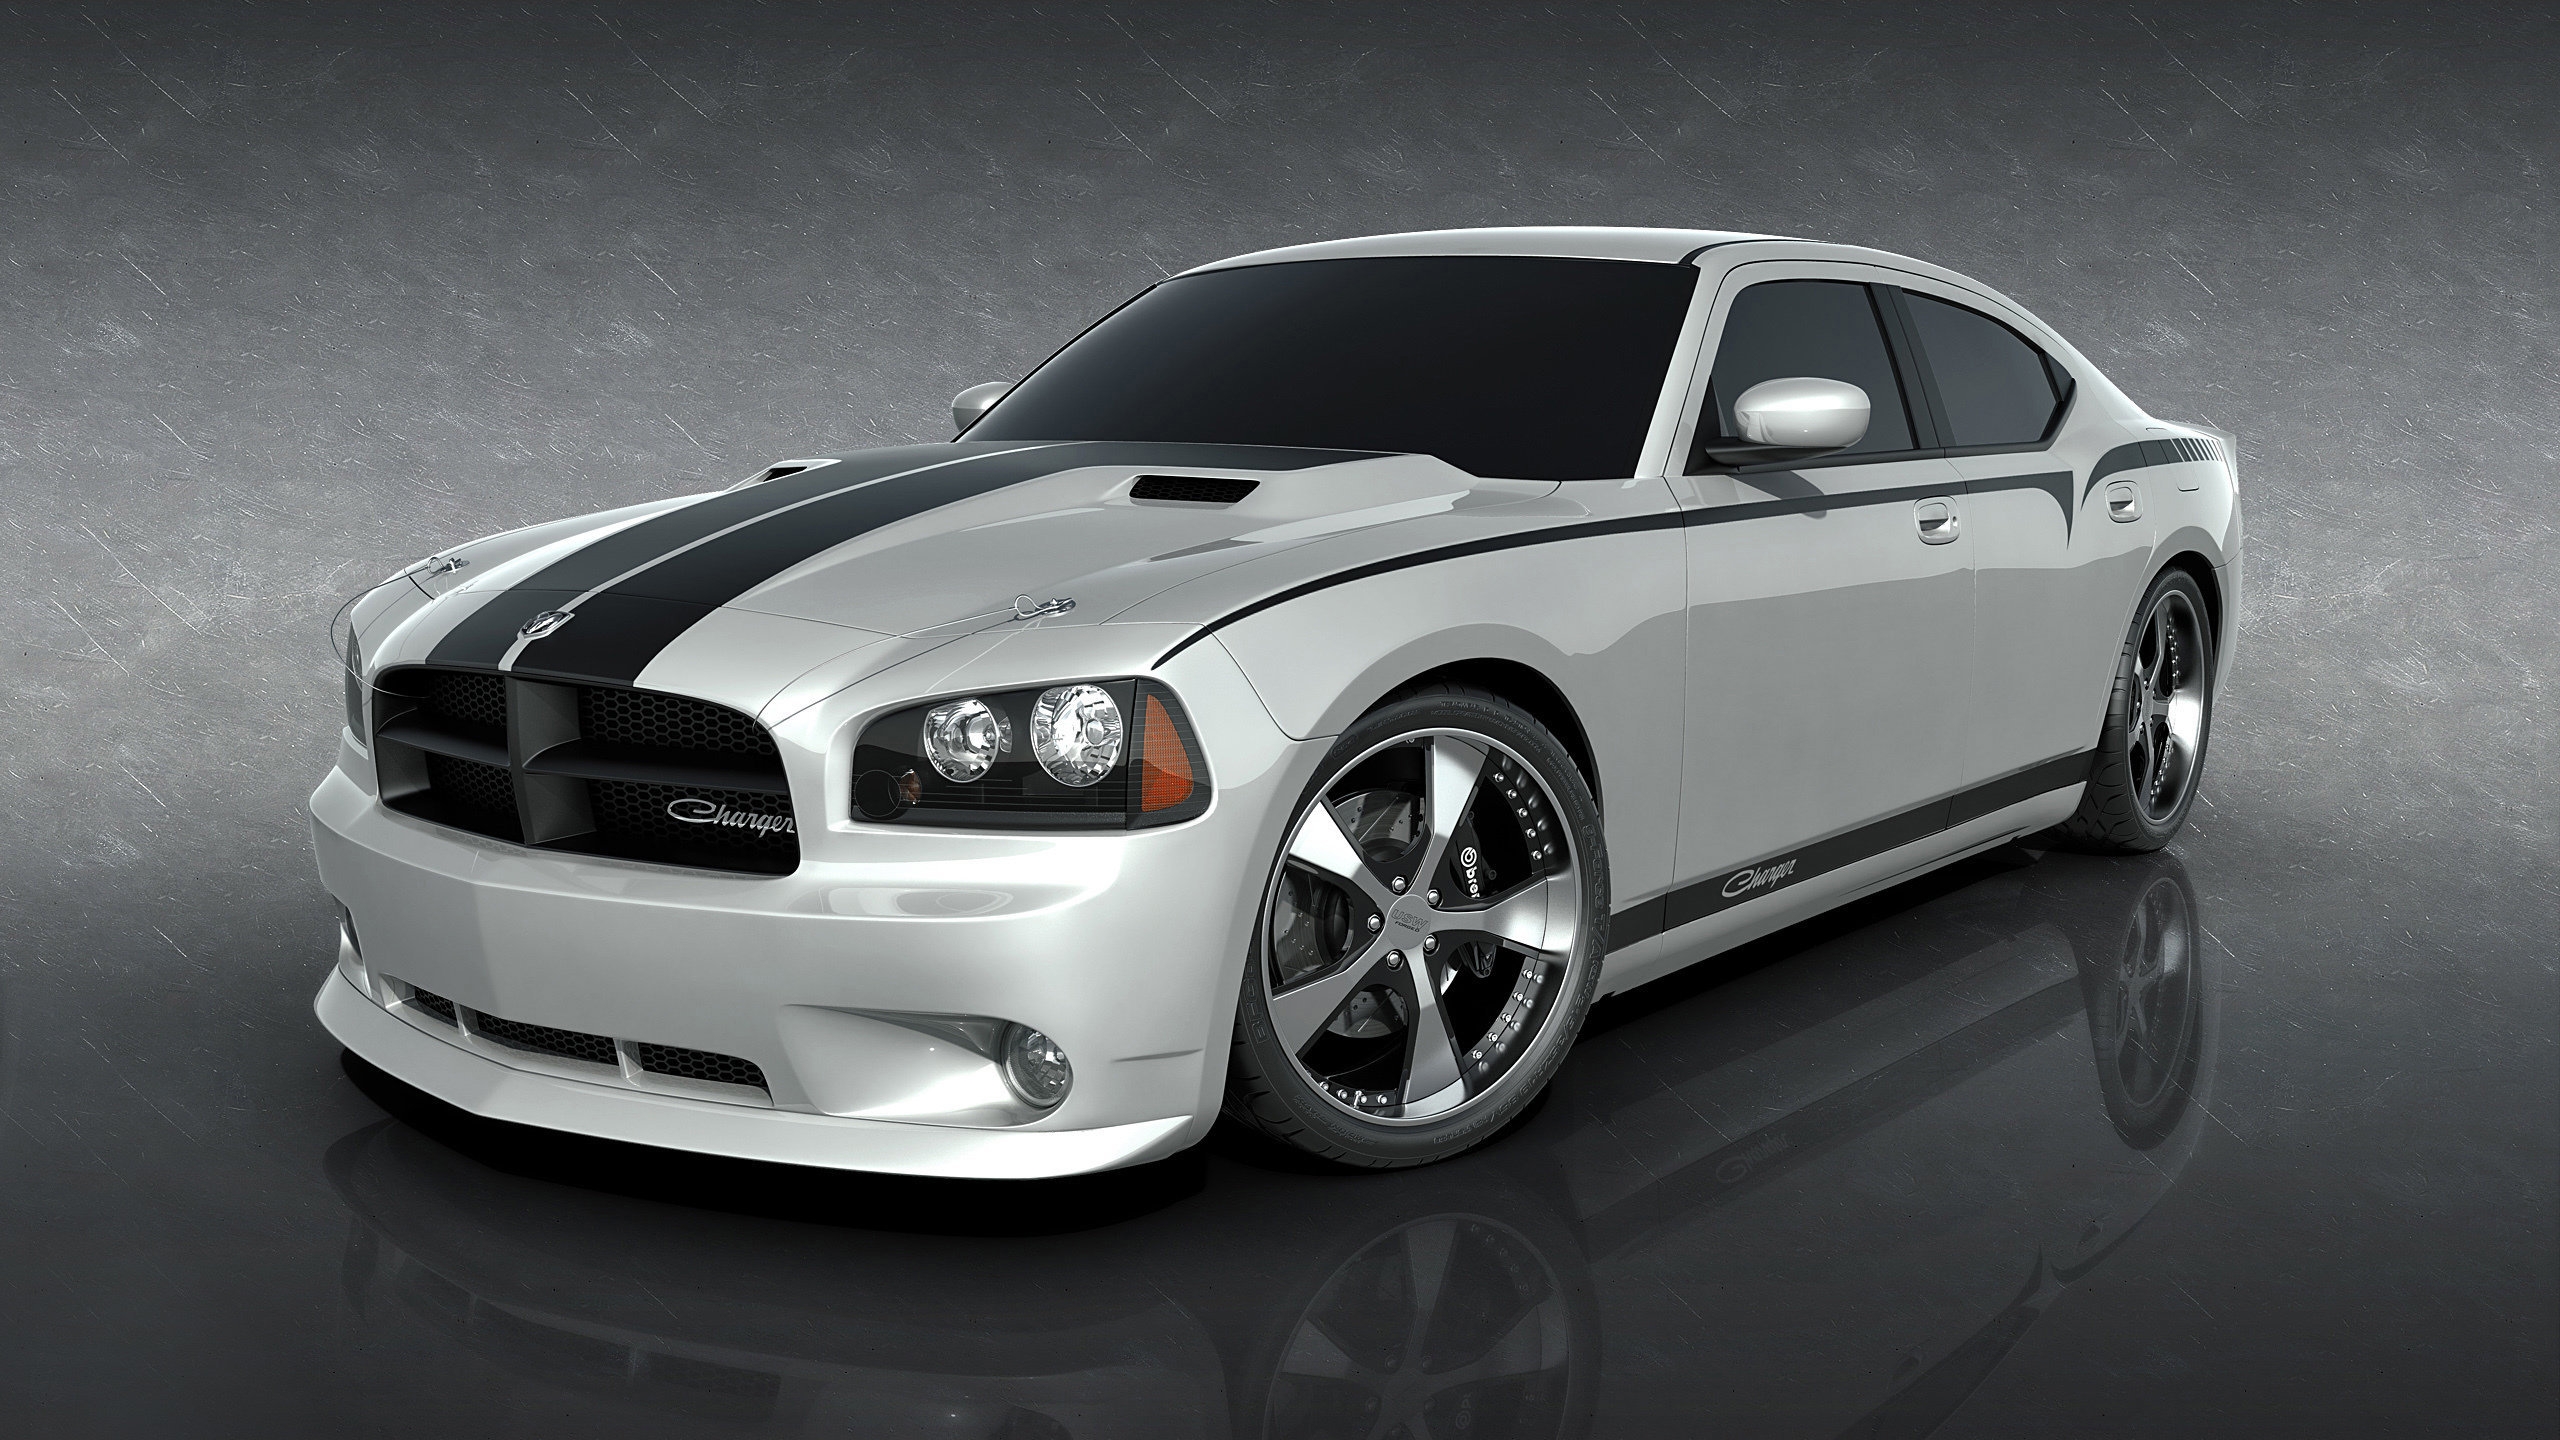 Special Dodge Charger for 2560x1440 HDTV resolution